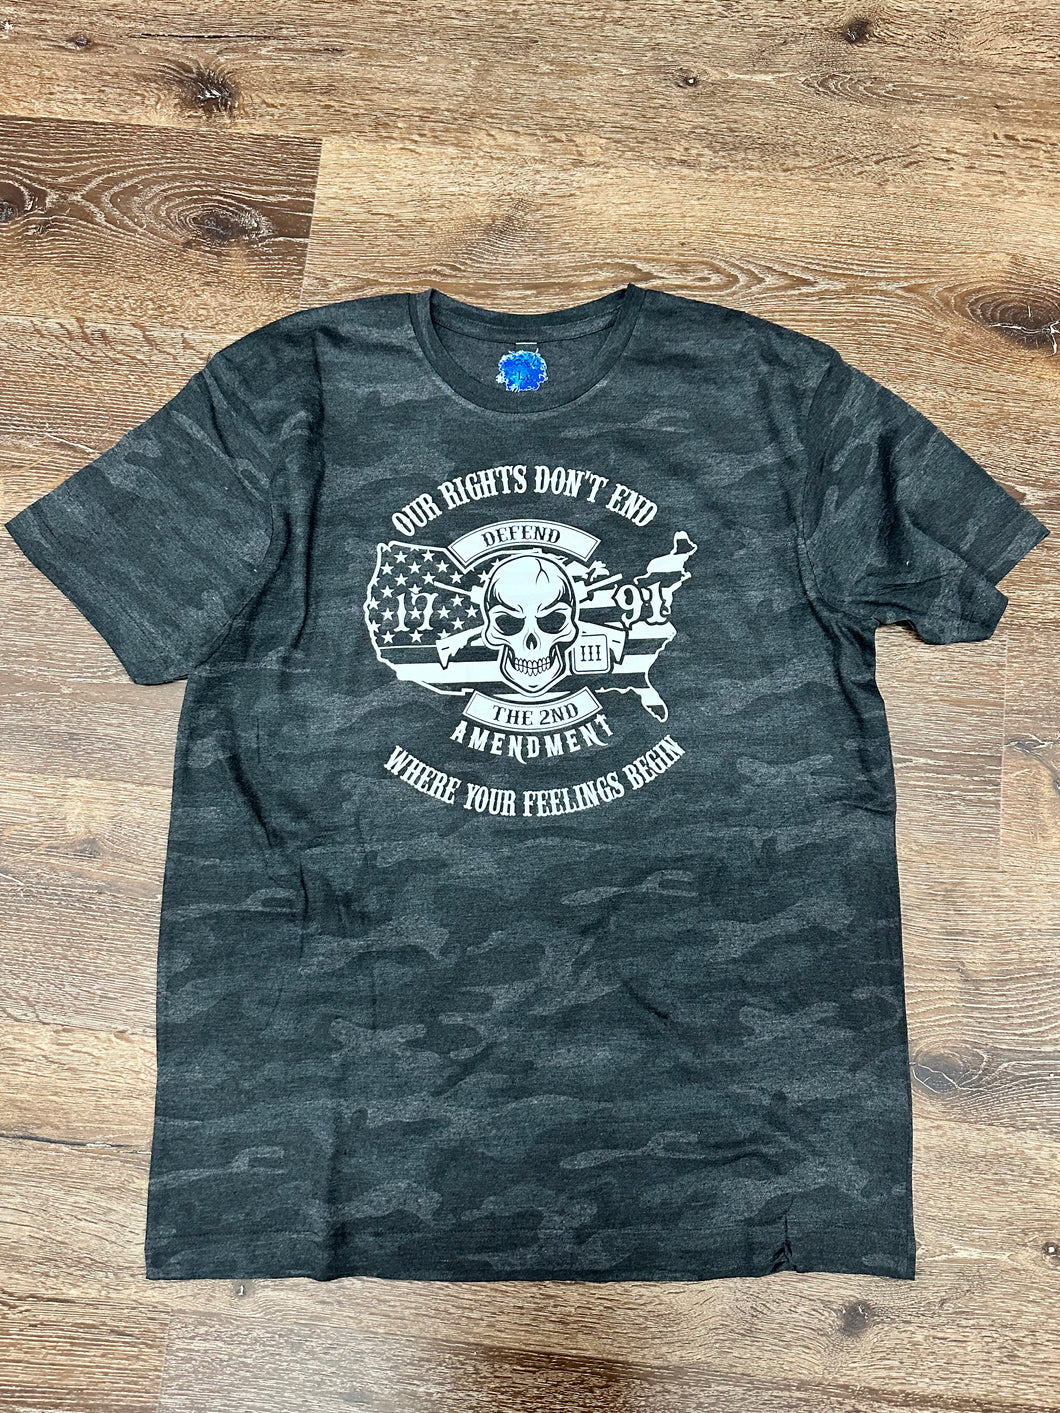 Our Rights Don’t End Graphic Tee